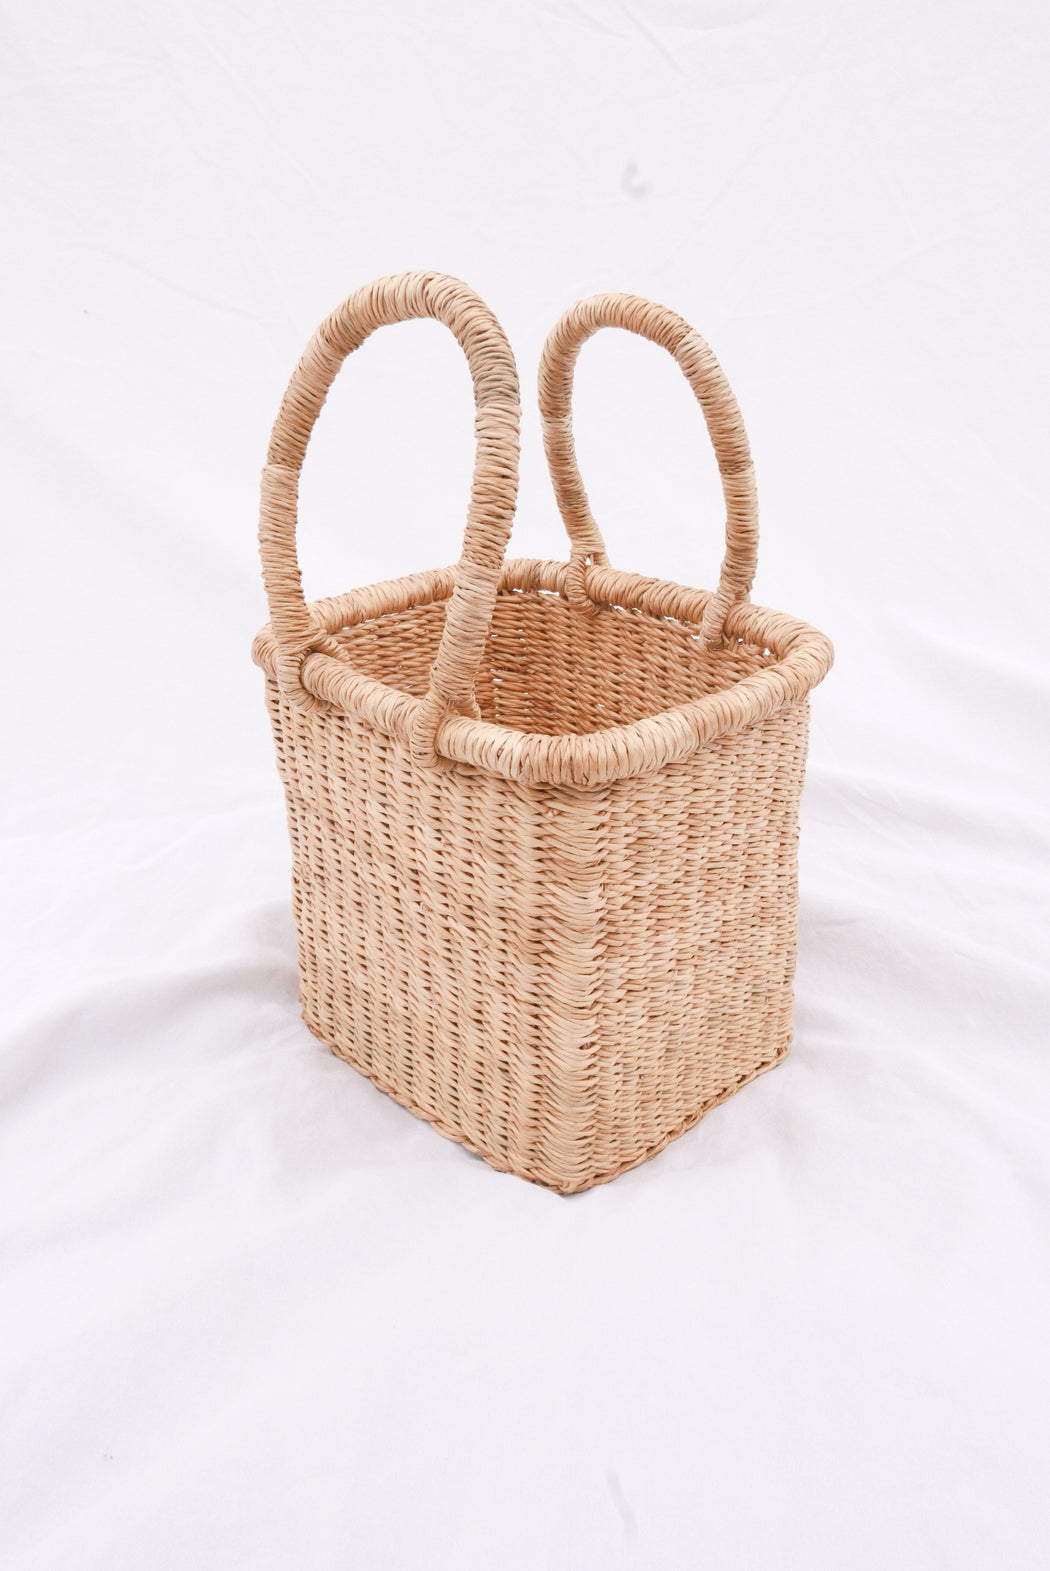 The Fuseini handbag is handwoven with straw called Kinkahe in Bolgatanga, Ghana. The shape is cube-like with two handles for durability. This product supports a community with employment, educational opportunities for the children and improve the work environment.